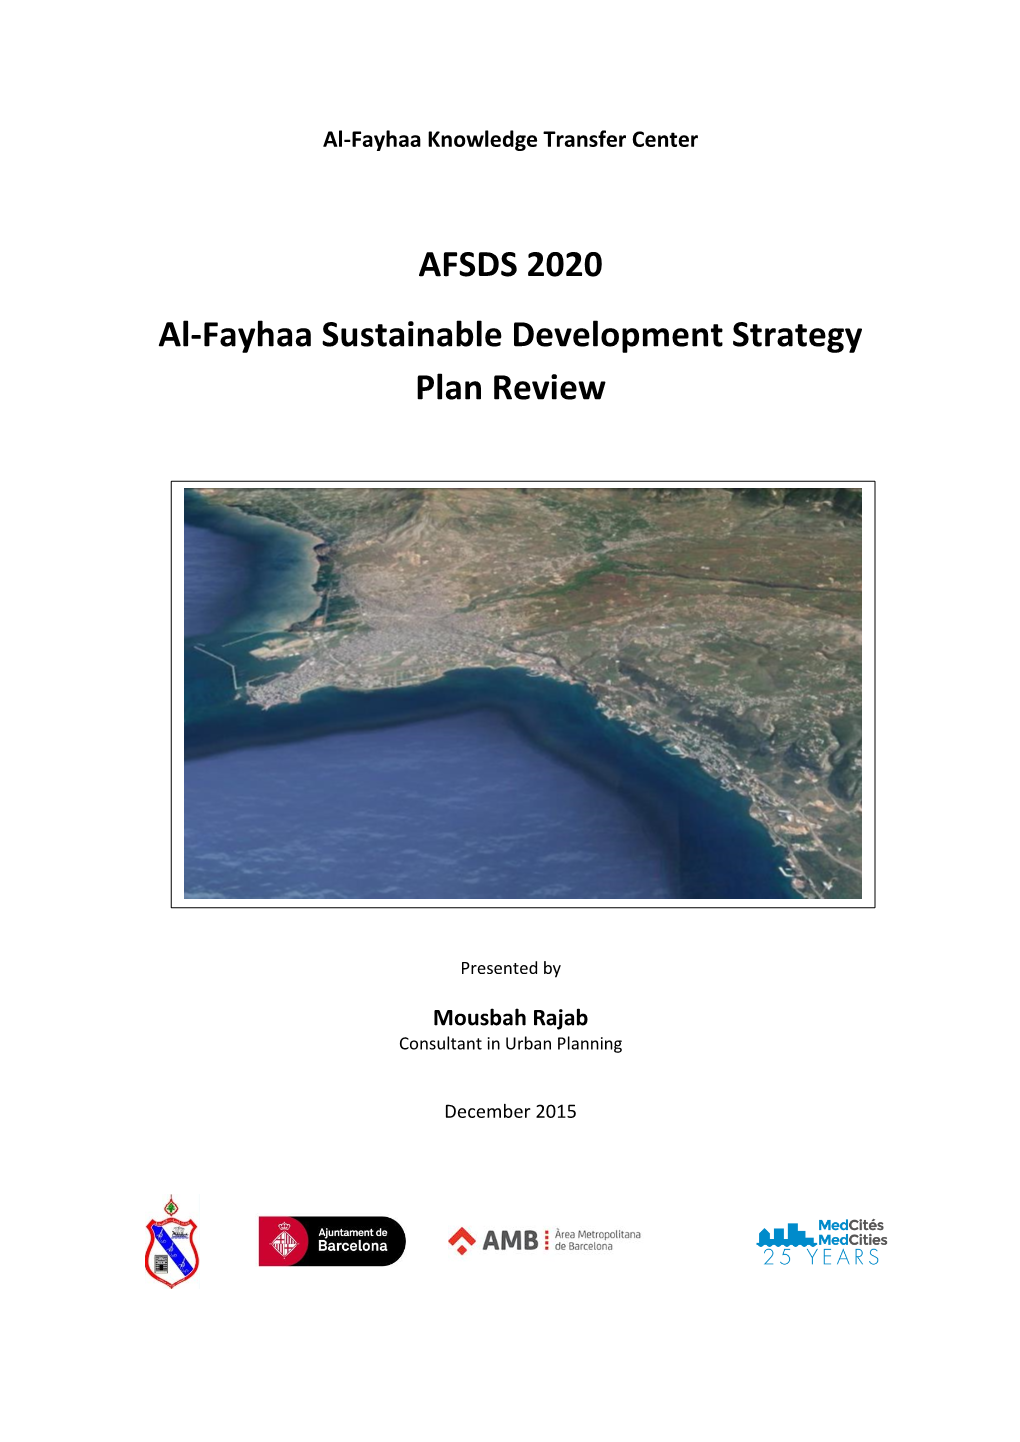 AFSDS 2020 Al-Fayhaa Sustainable Development Strategy Plan Review